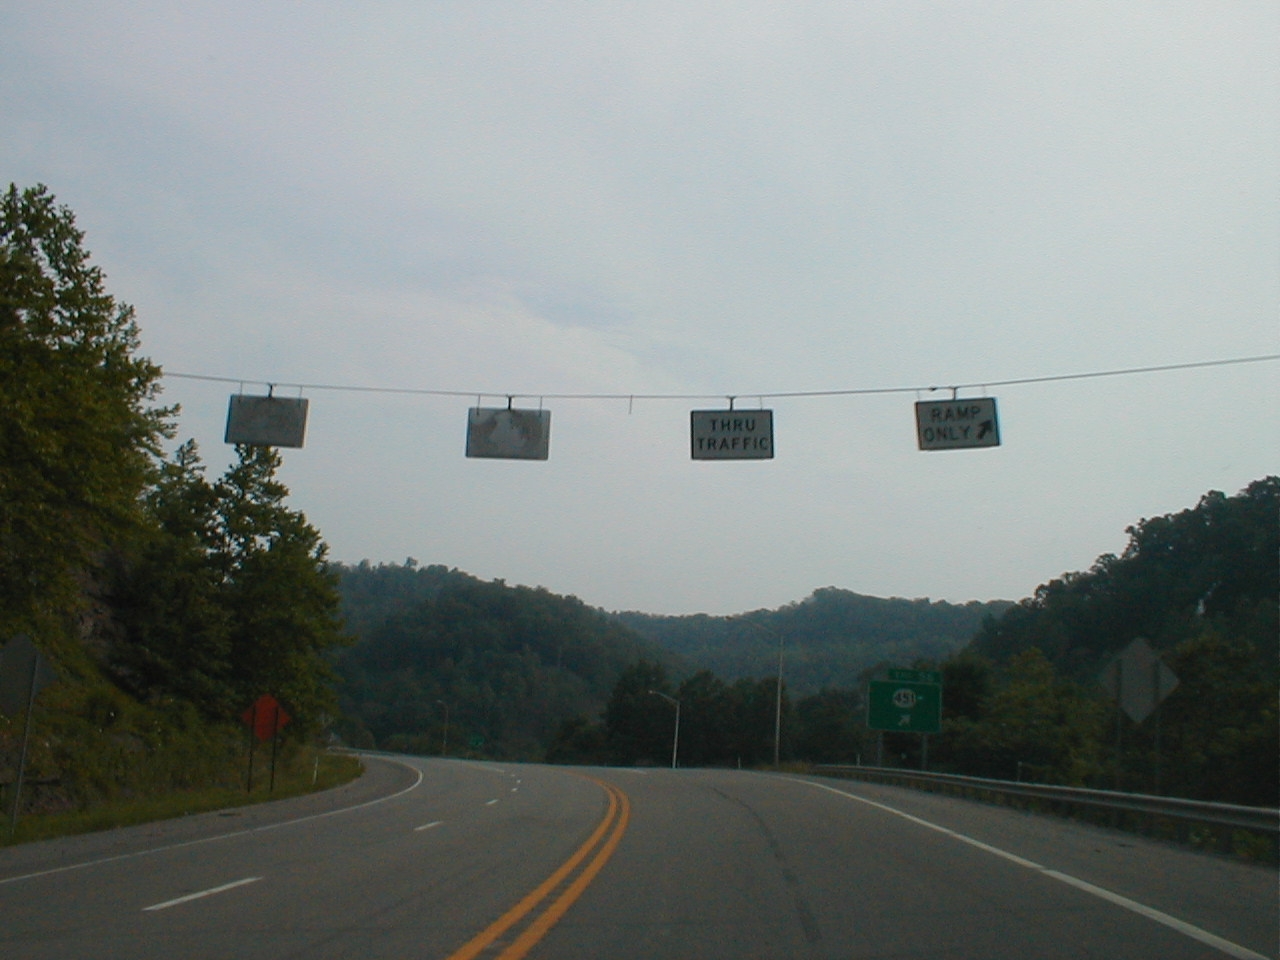 Overhead signage for "thru traffic" and "ramp only" while heading west at Exit 56.